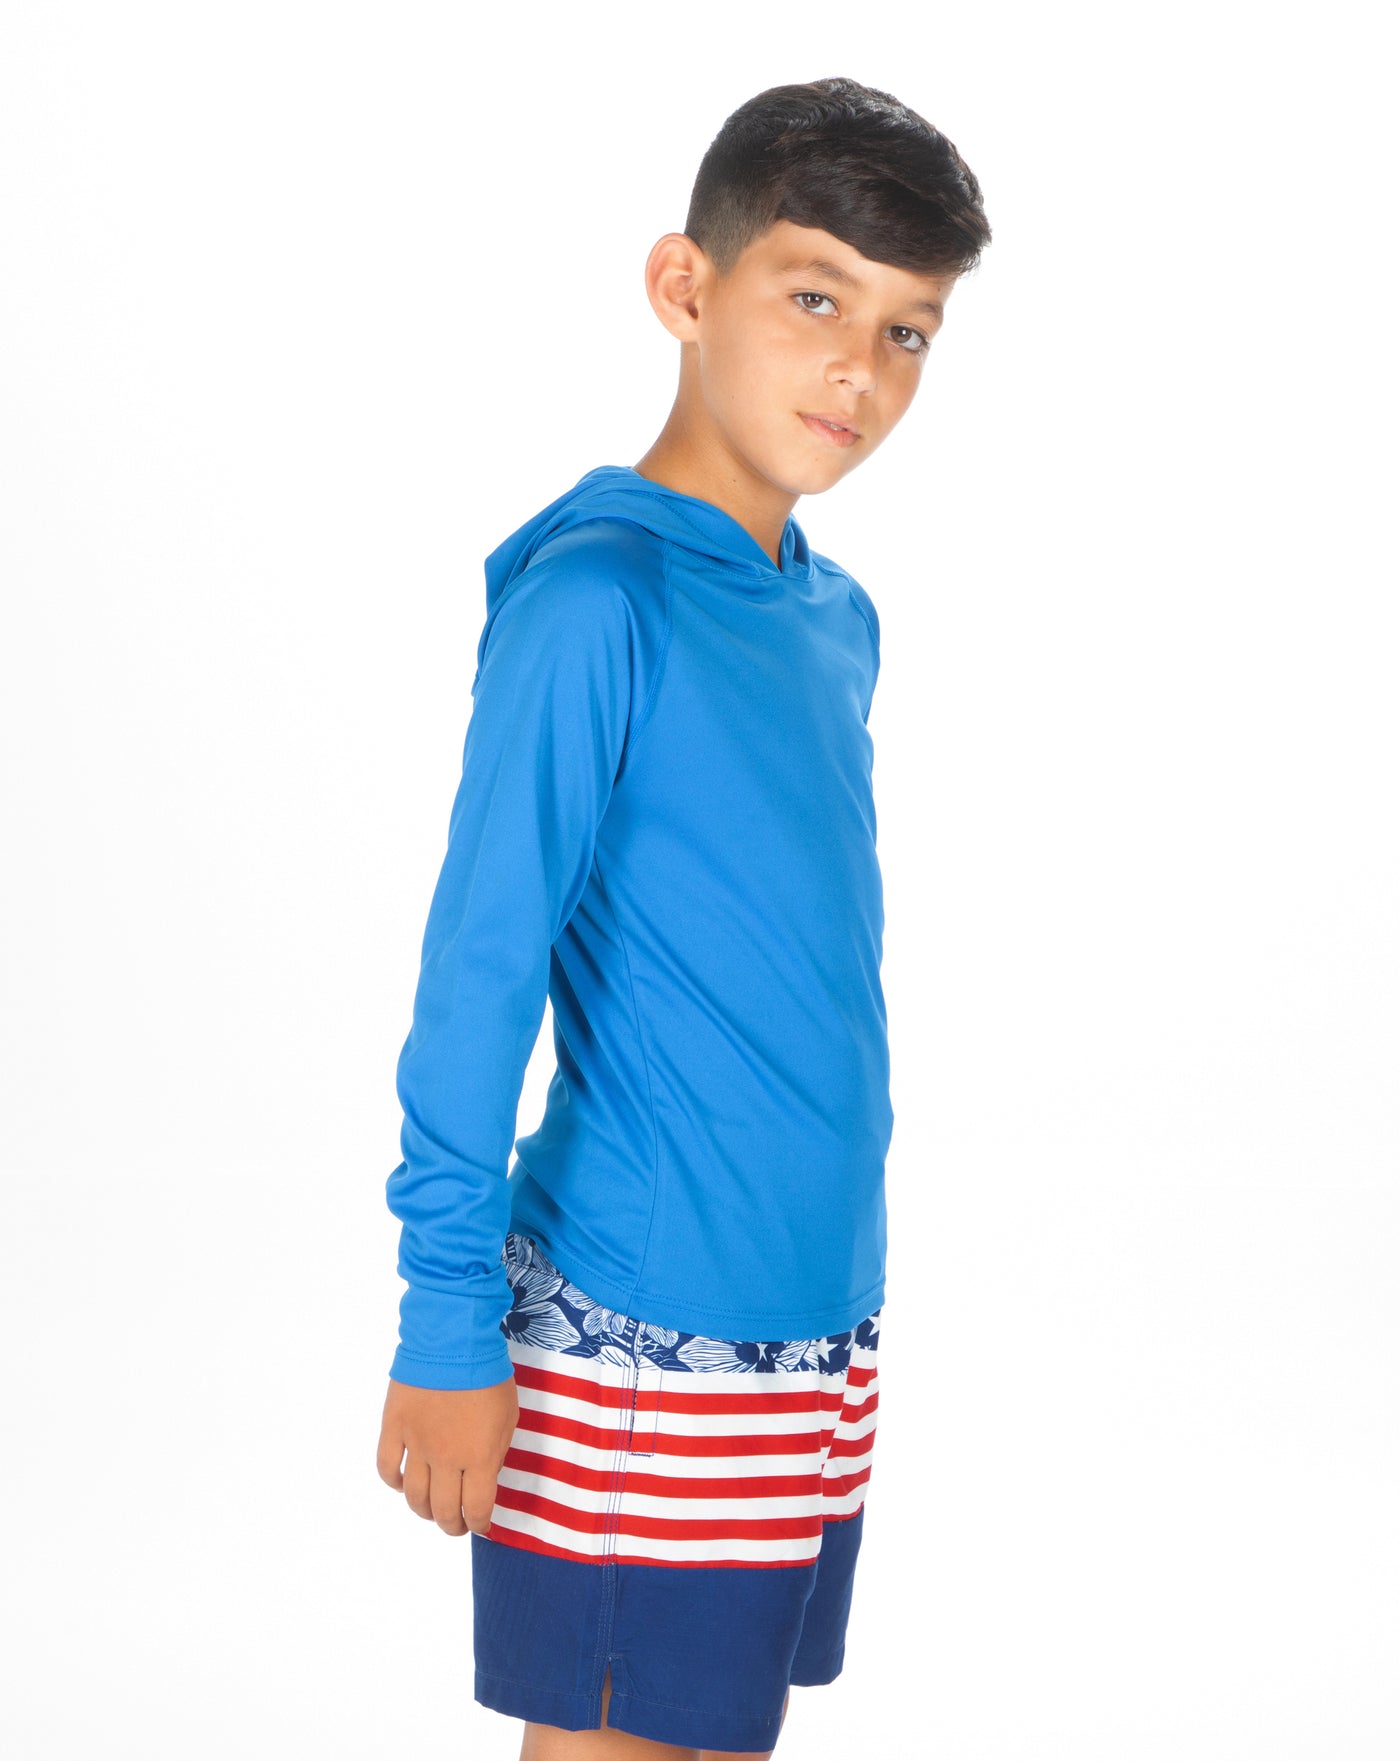 Boys Blue Marlin L/S Performance Hooded Top - Wavelife